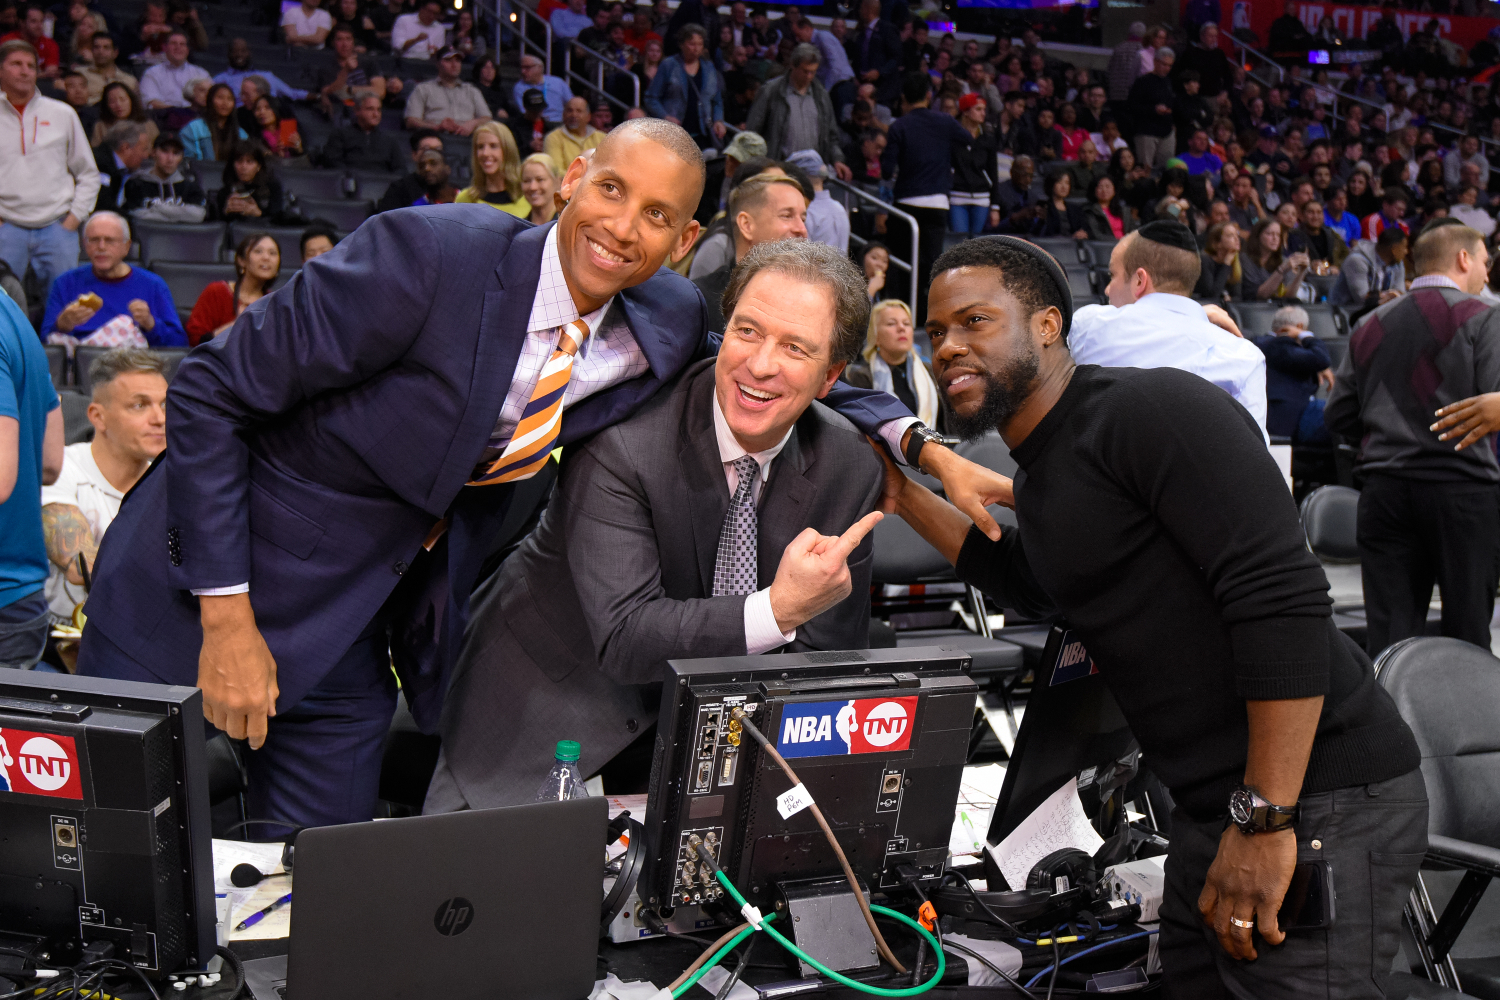 Kevin Harlan has become one of the top announcers in the NFL and the NBA.